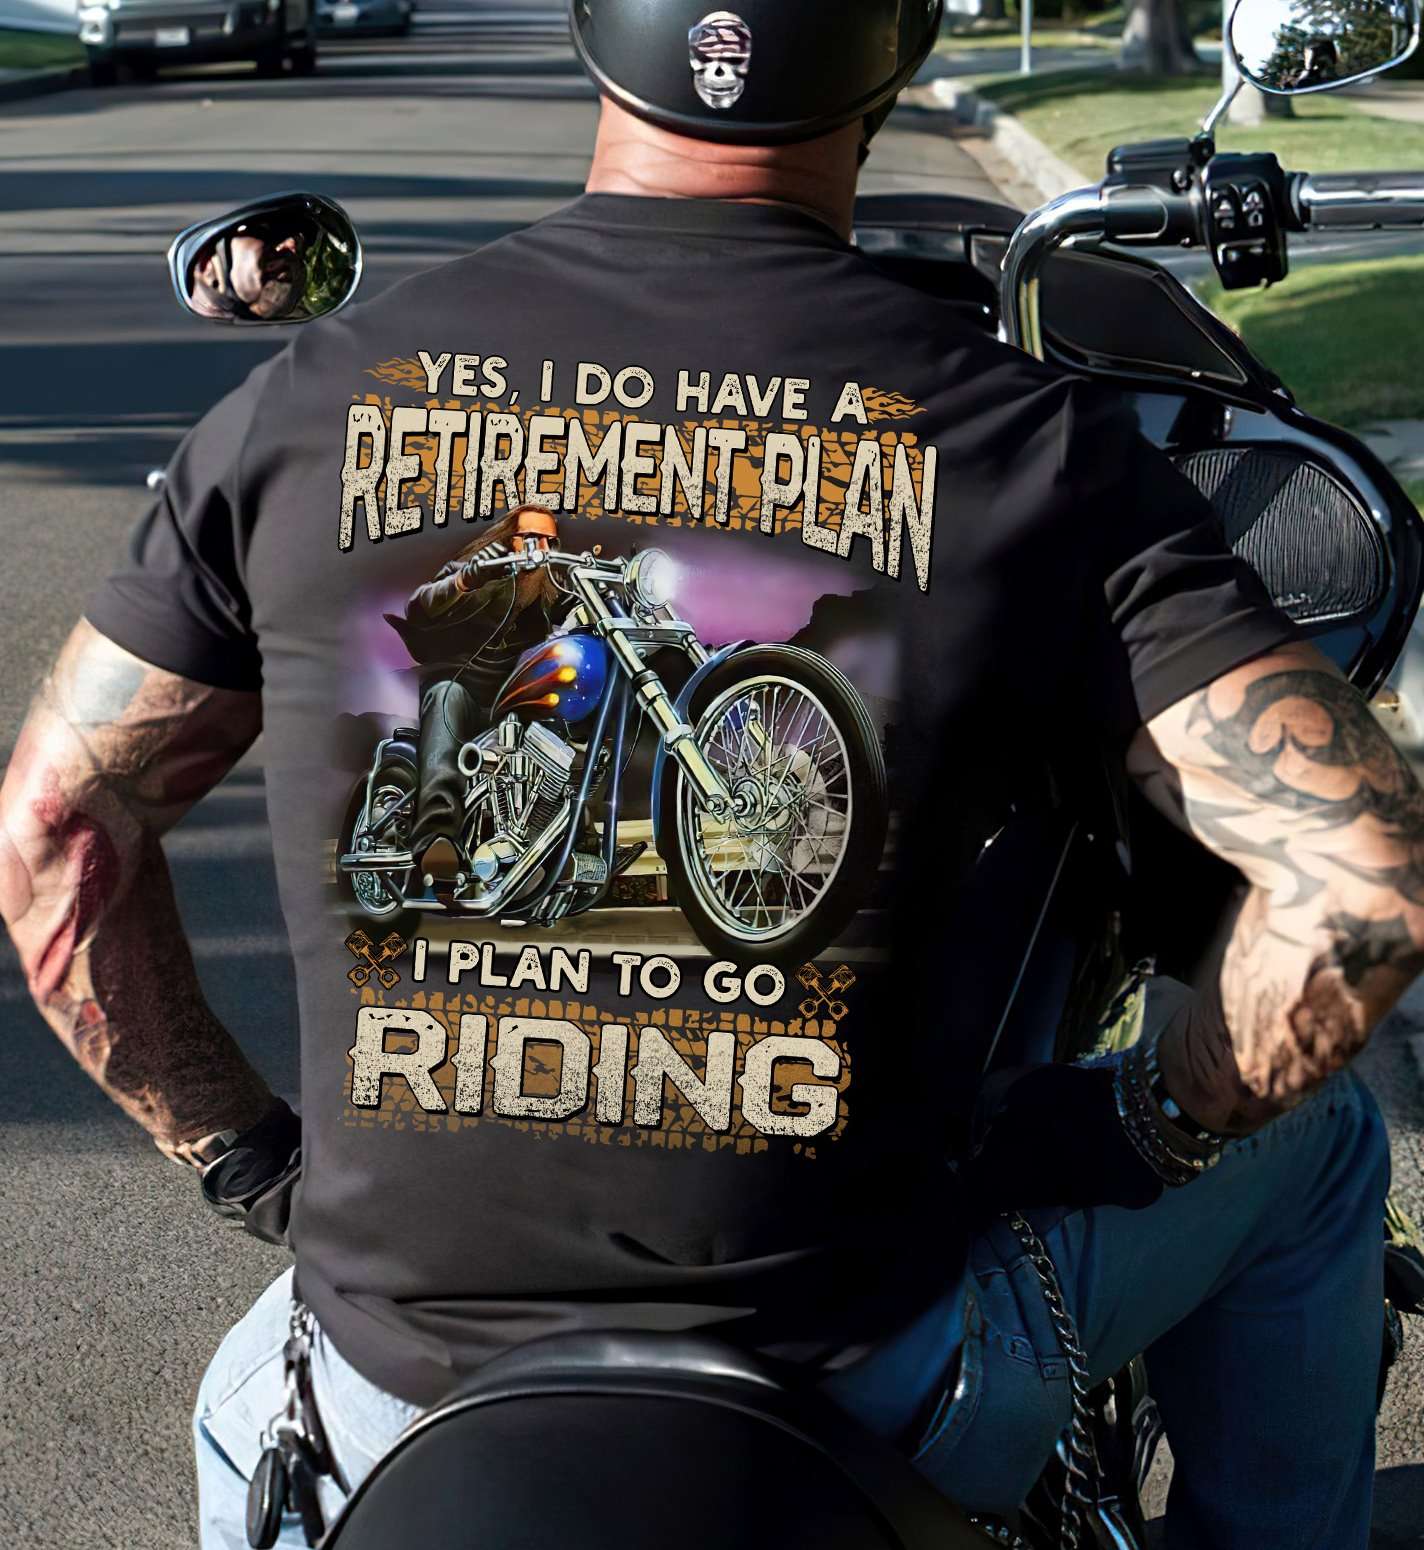 Yes I do have a retirement plan I plan to go riding - Love riding motorcycle, gift for biker